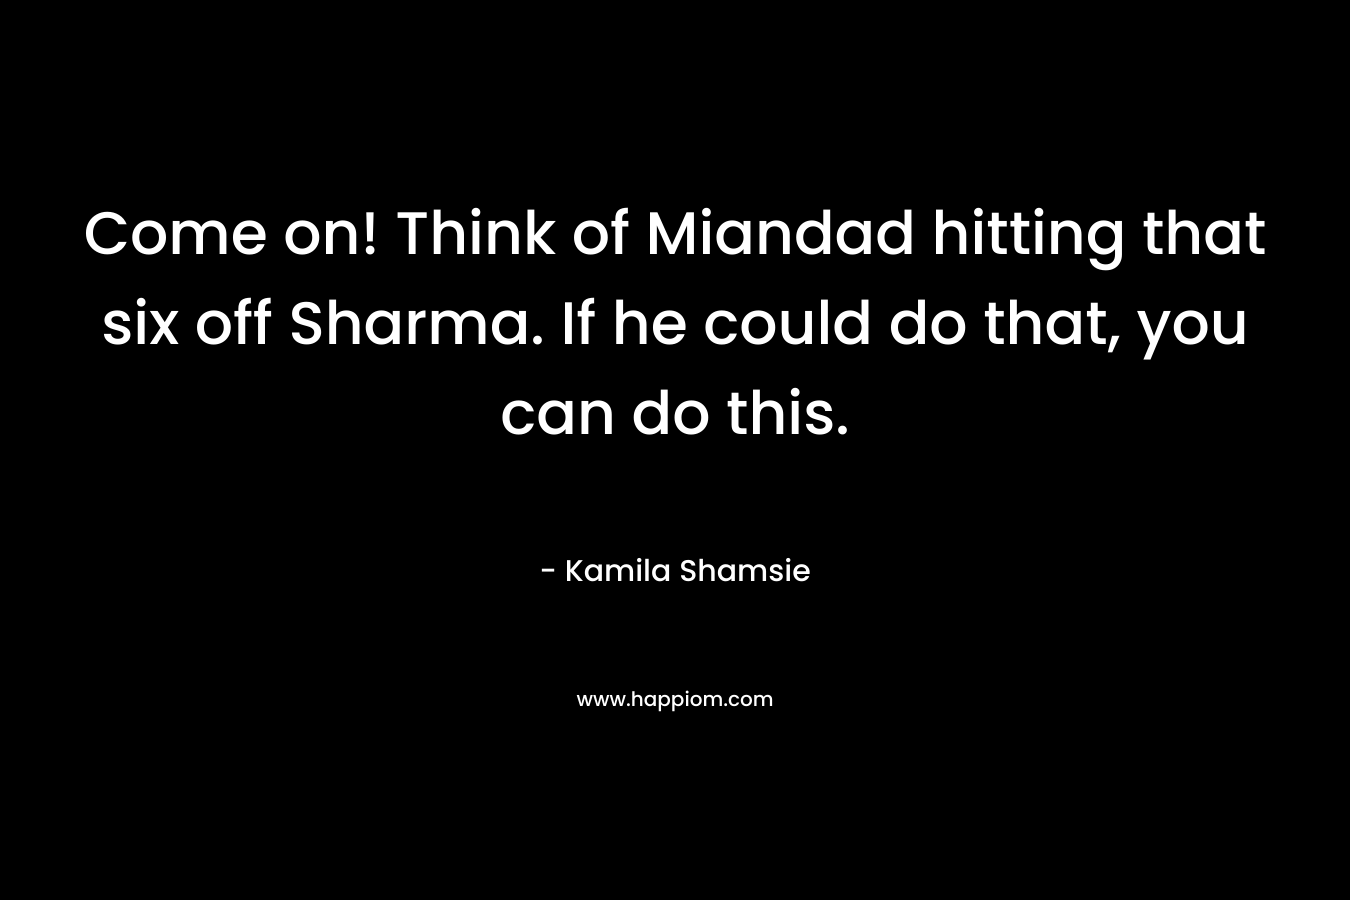 Come on! Think of Miandad hitting that six off Sharma. If he could do that, you can do this. – Kamila Shamsie